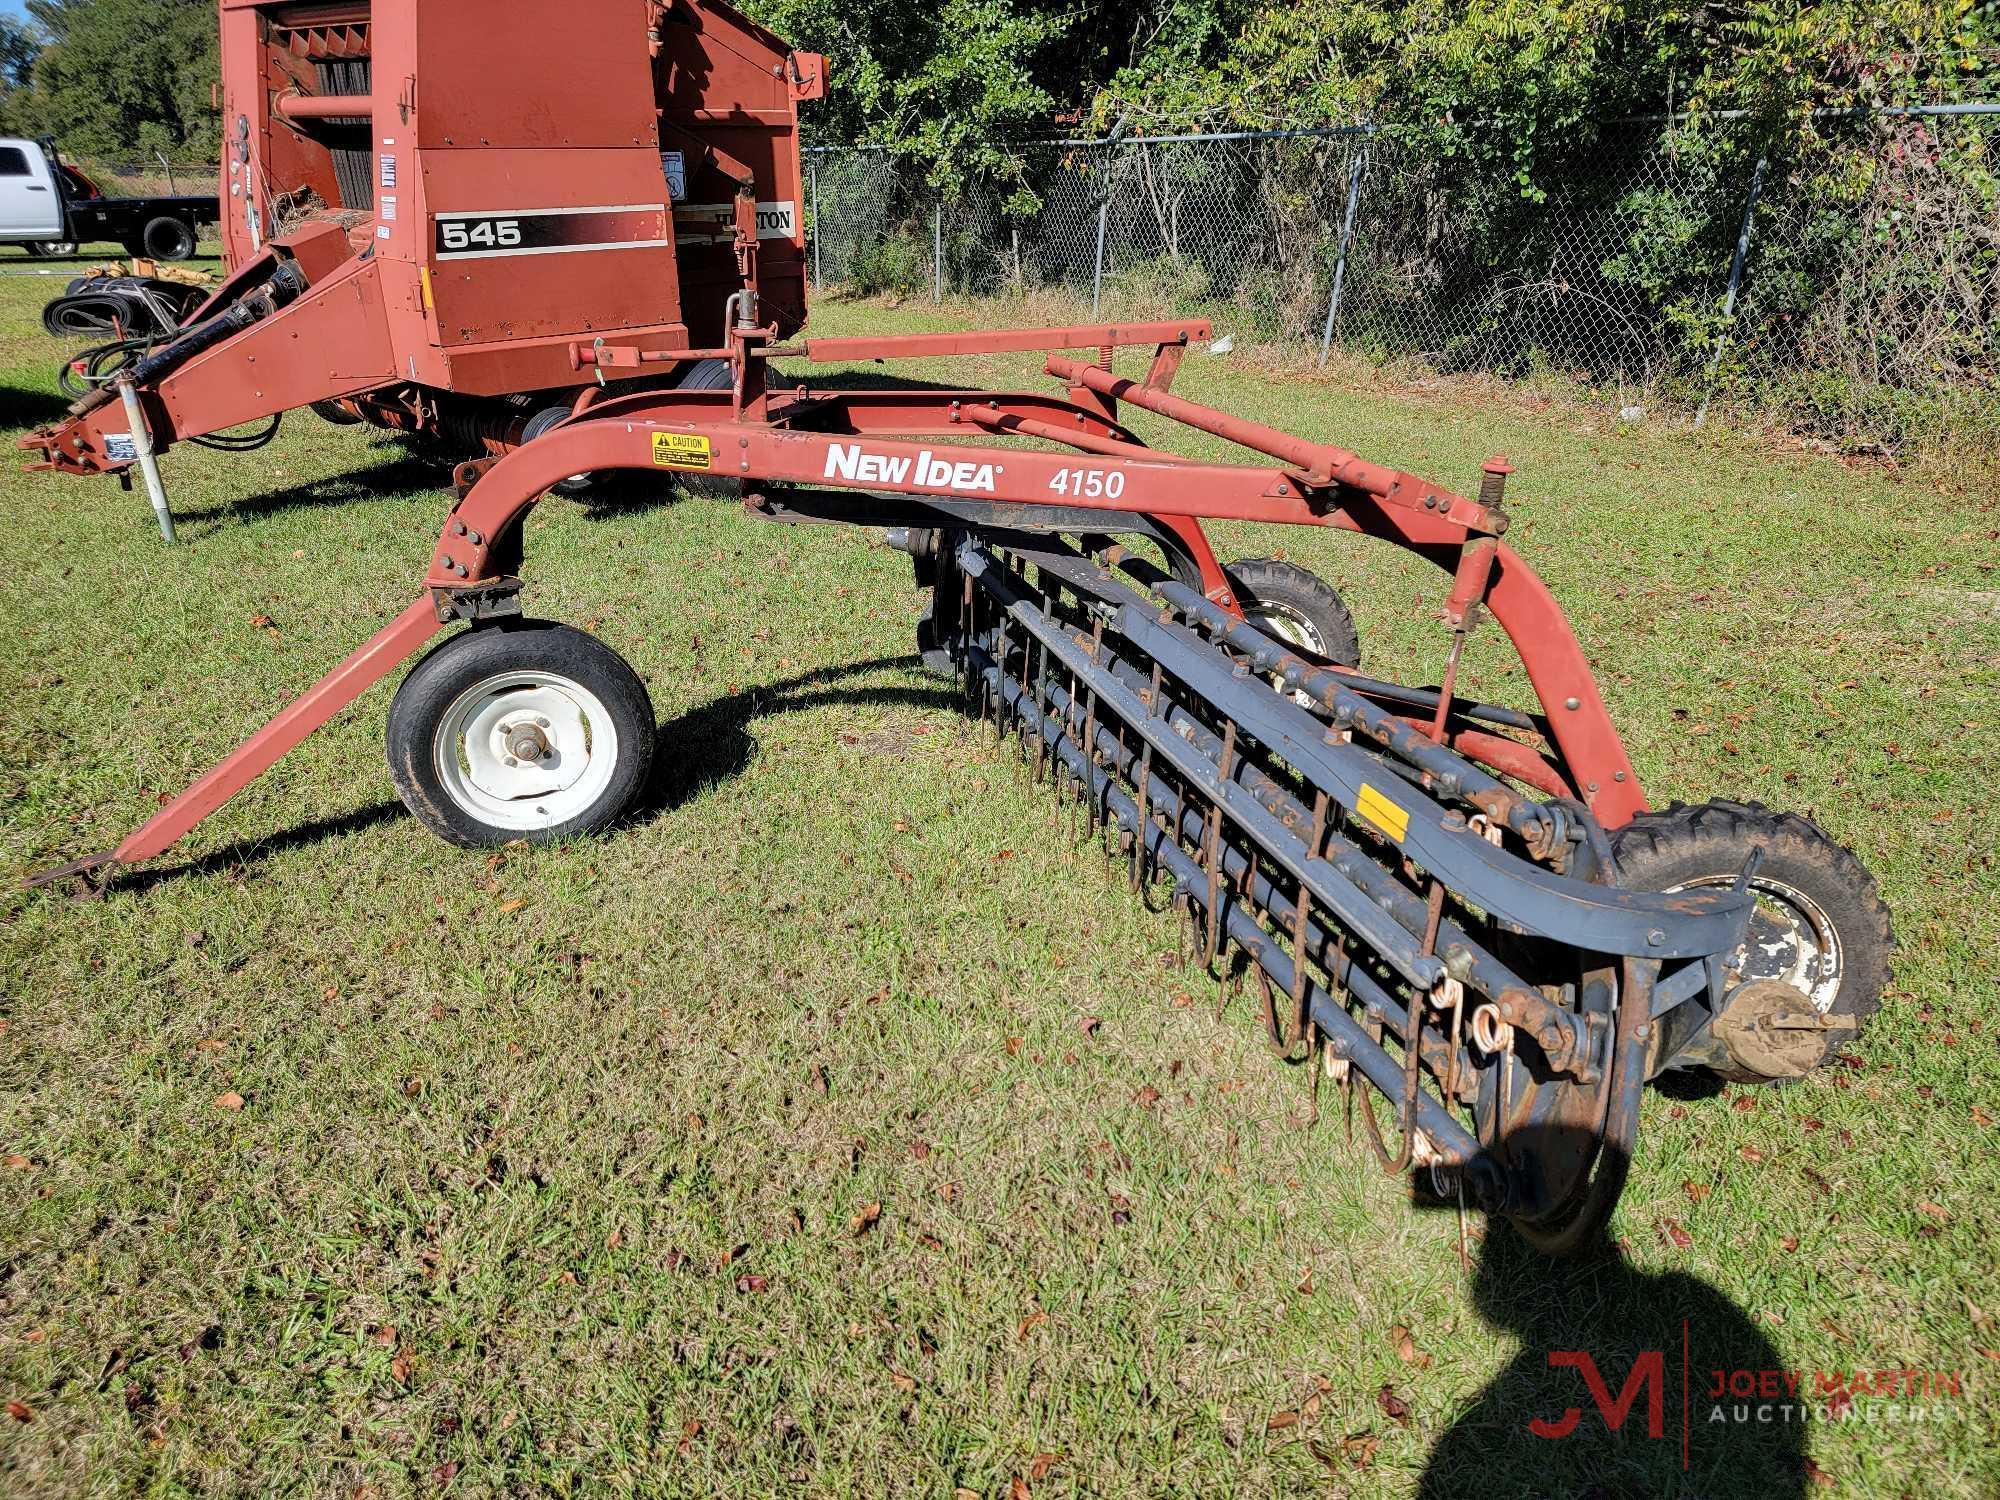 NEW IDEA 4150 SIDE DELIVERY HAY RAKE WITH DOLLY